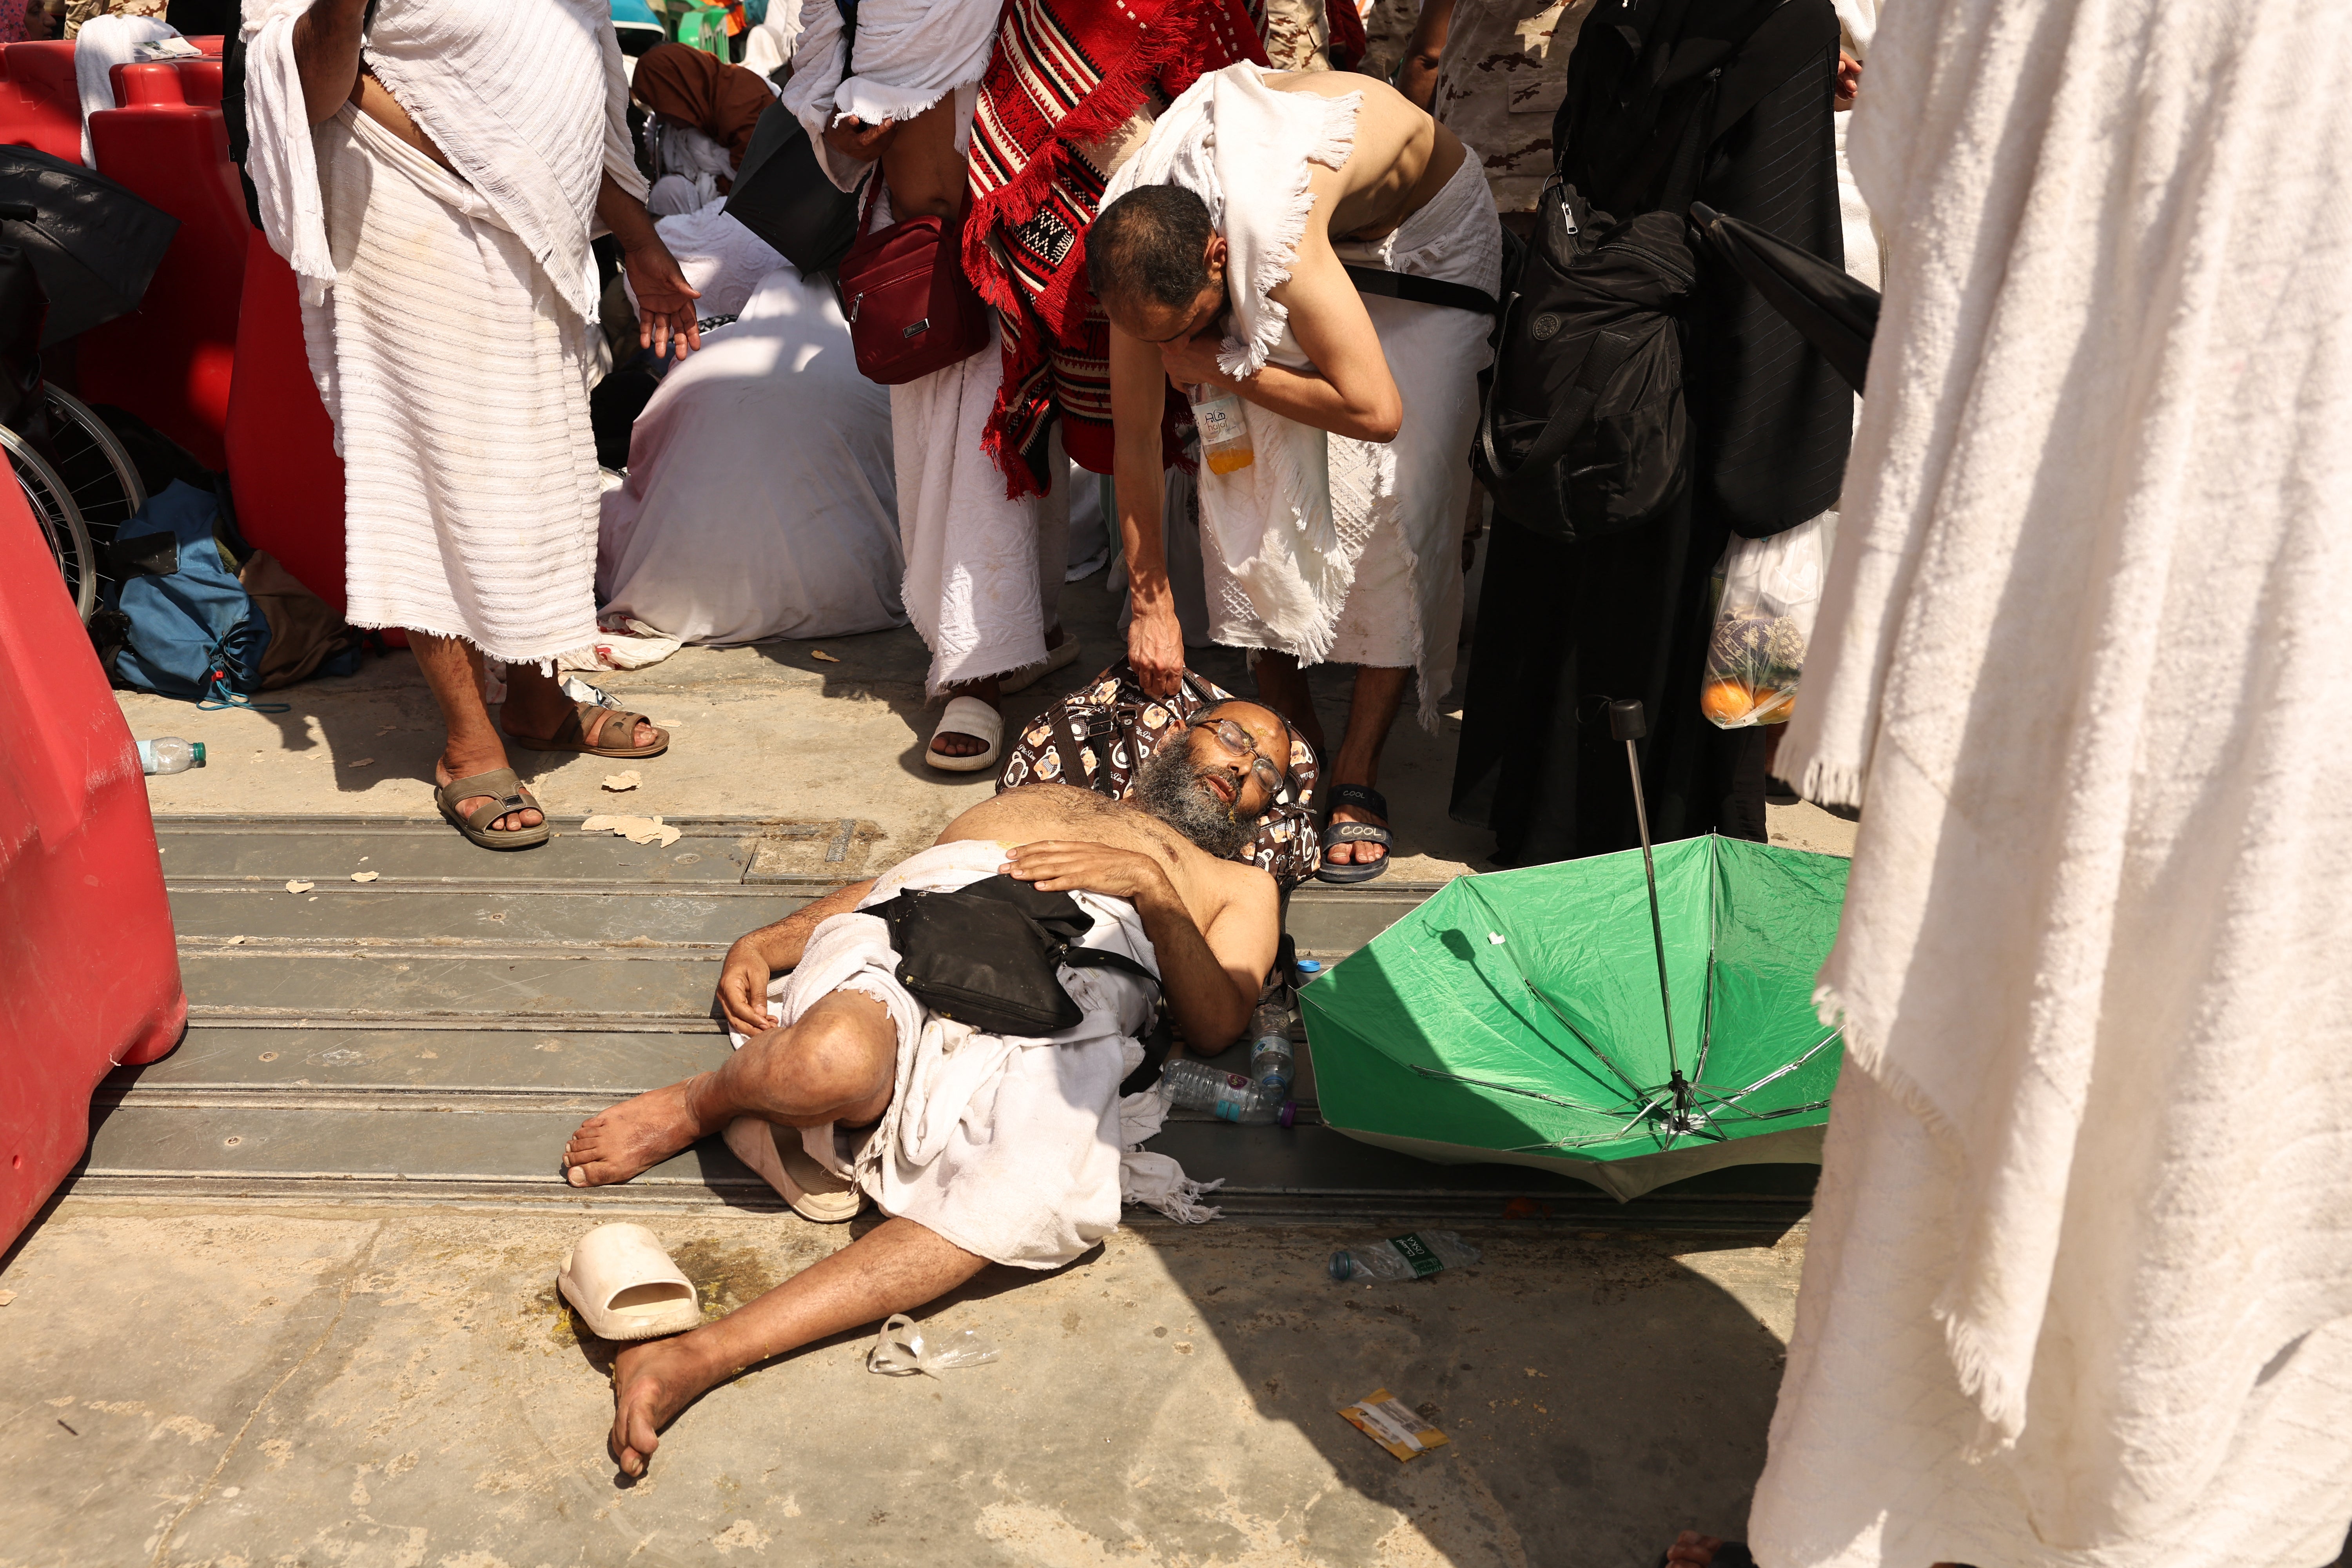 A man, affected by the scorching heat, is helped by another Muslim pilgrim as they arrive to perform the symbolic 'stoning of the devil' ritual during the annual hajj pilgrimage in Mina